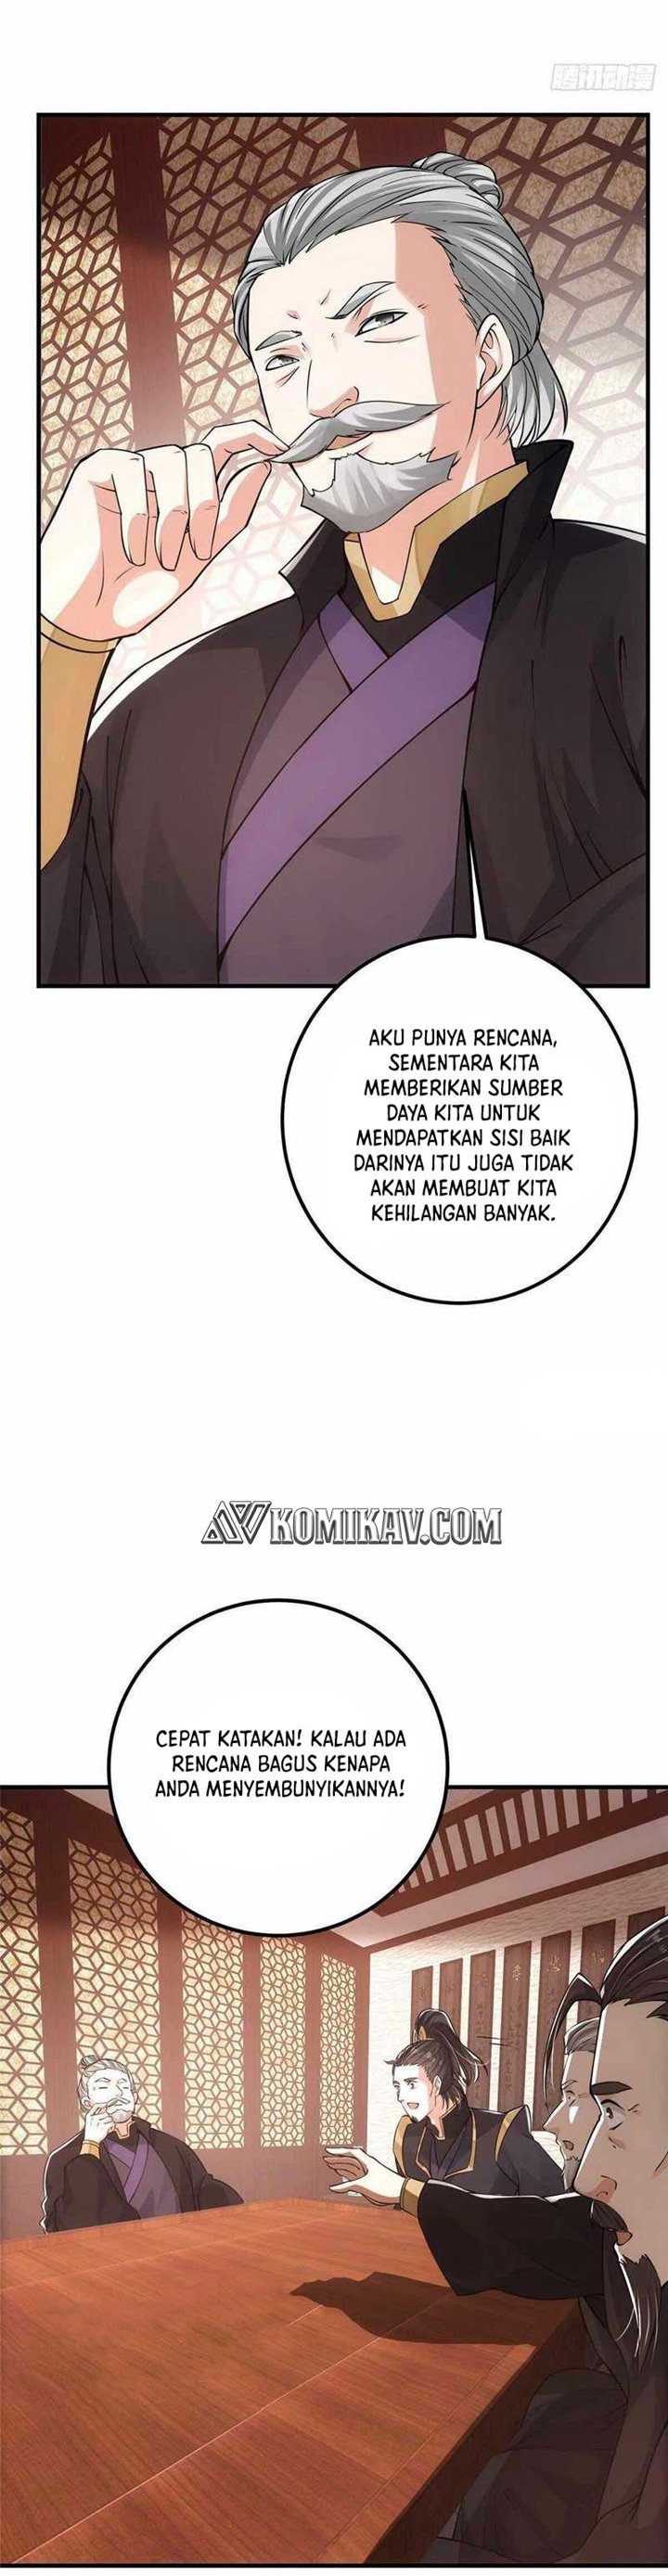 Keep A Low Profile, Sect Leader Chapter 32 Bahasa Indonesia